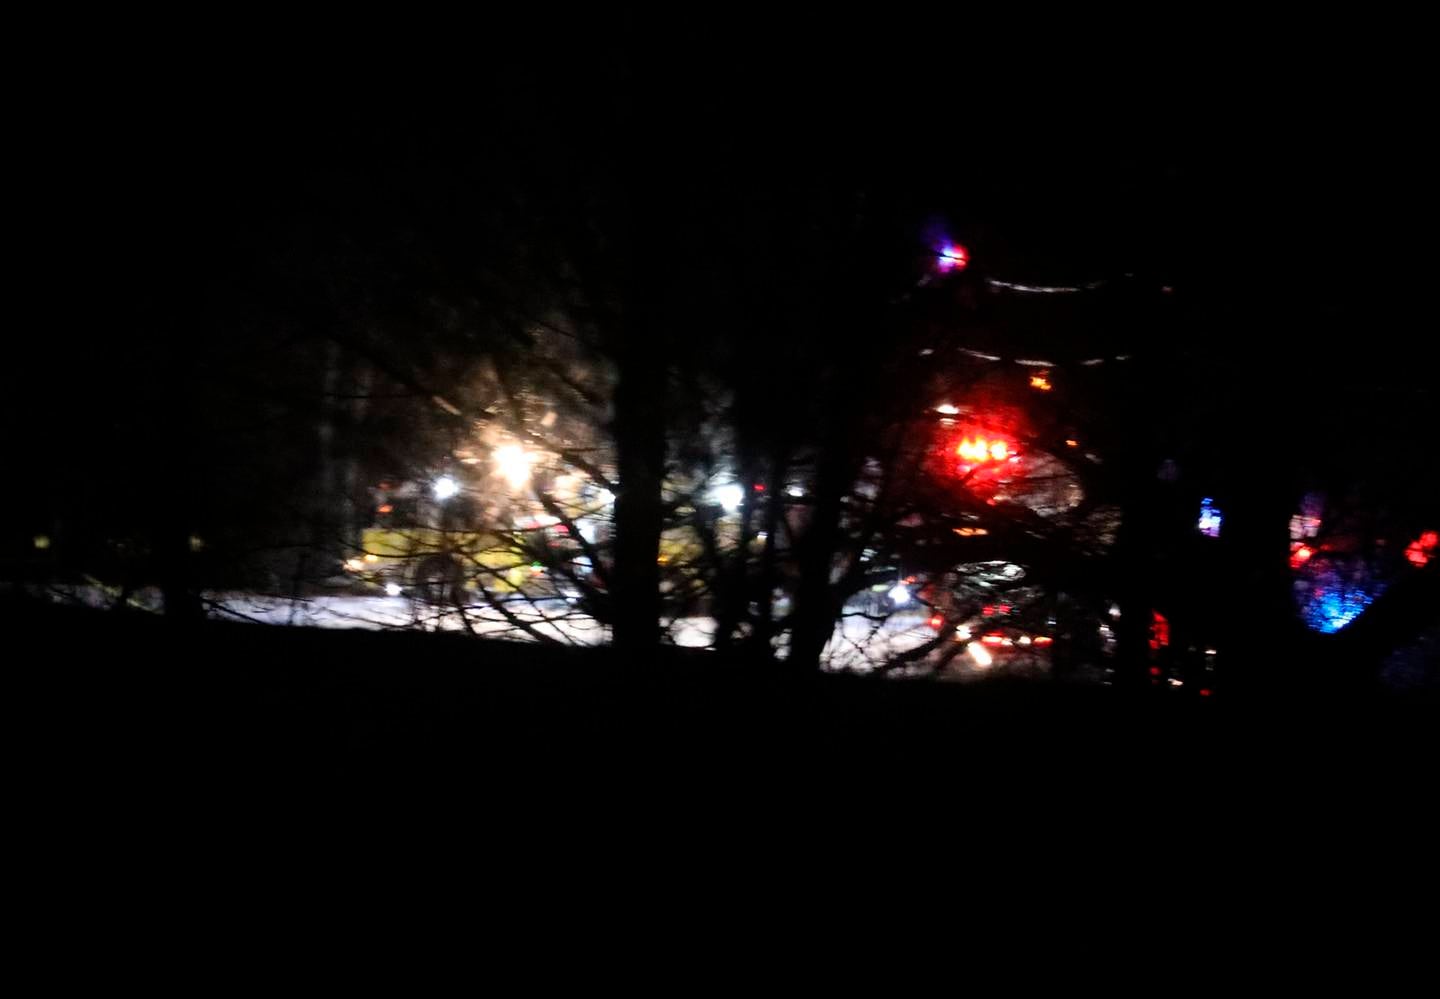 Mendon firefighters and other emergency personnel respond to a military helicopter crash in a field near Cheese Factory Road and W. Bloomfield Road in Mendon, N.Y., late Wednesday, Jan. 20, 2021.